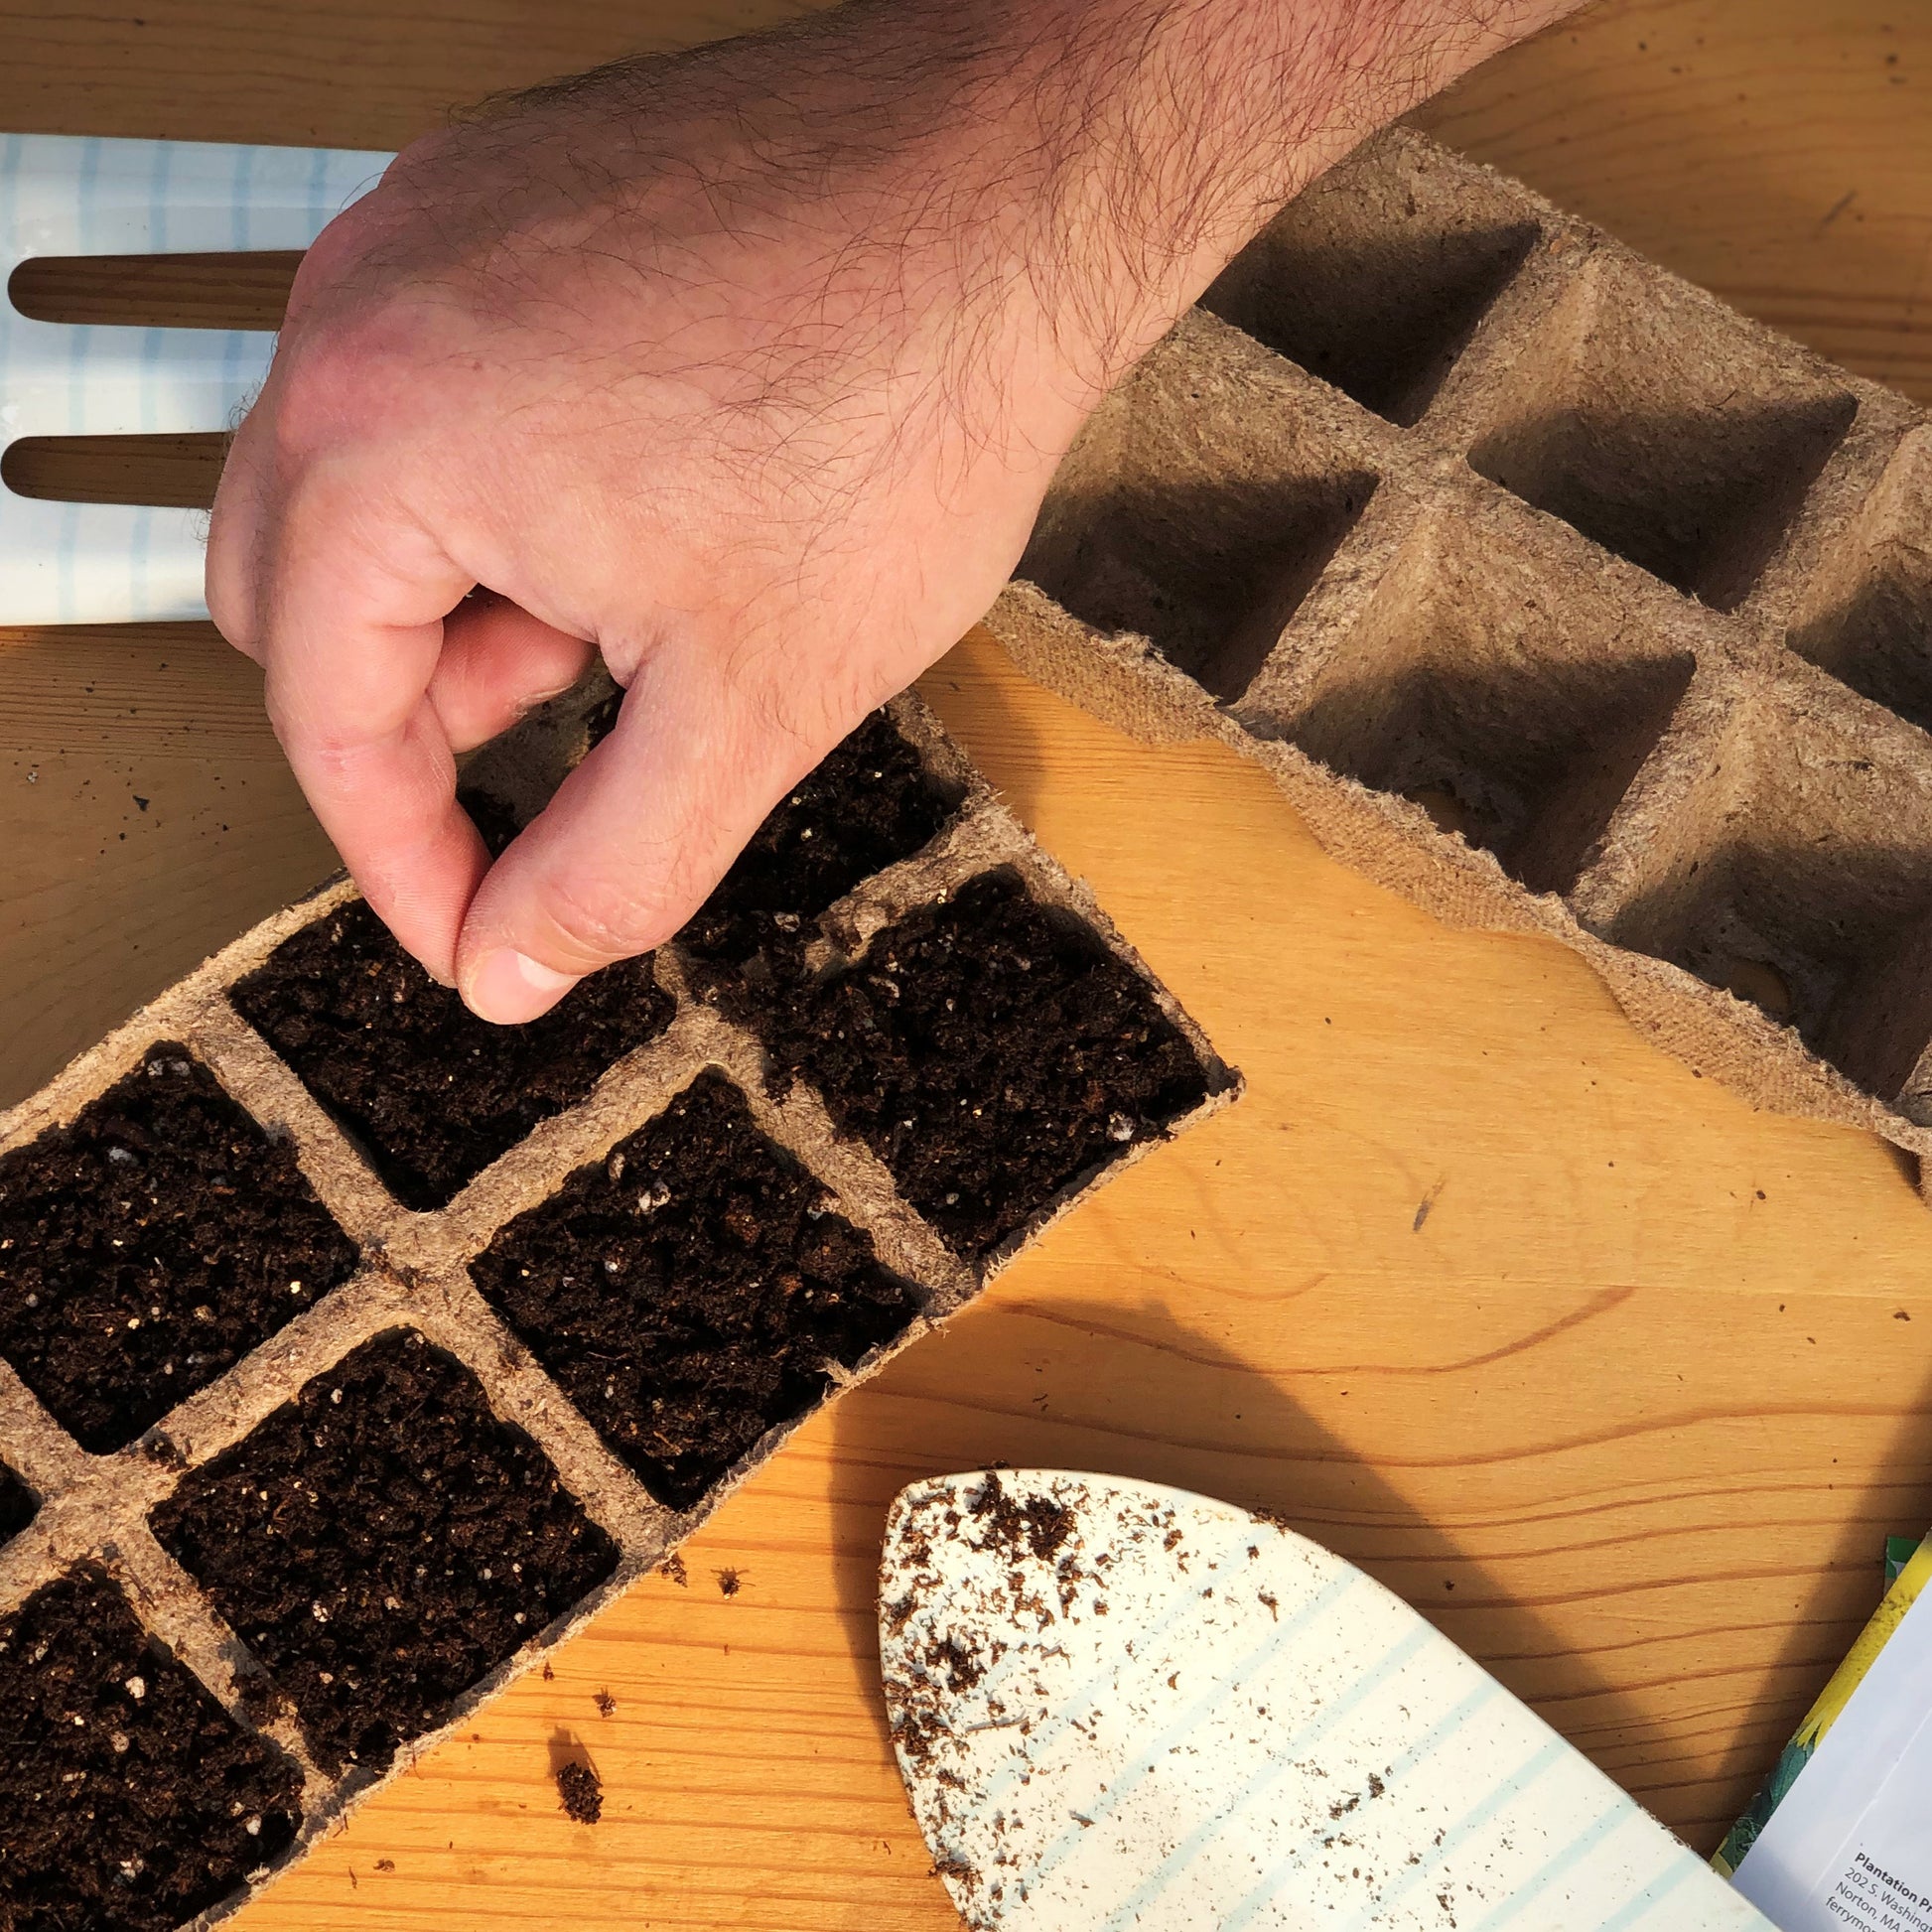 Start your Table Queen Acorn Squash seeds in biodegradable Jiffy peat strip trays filled with sowing medium of your choosing.